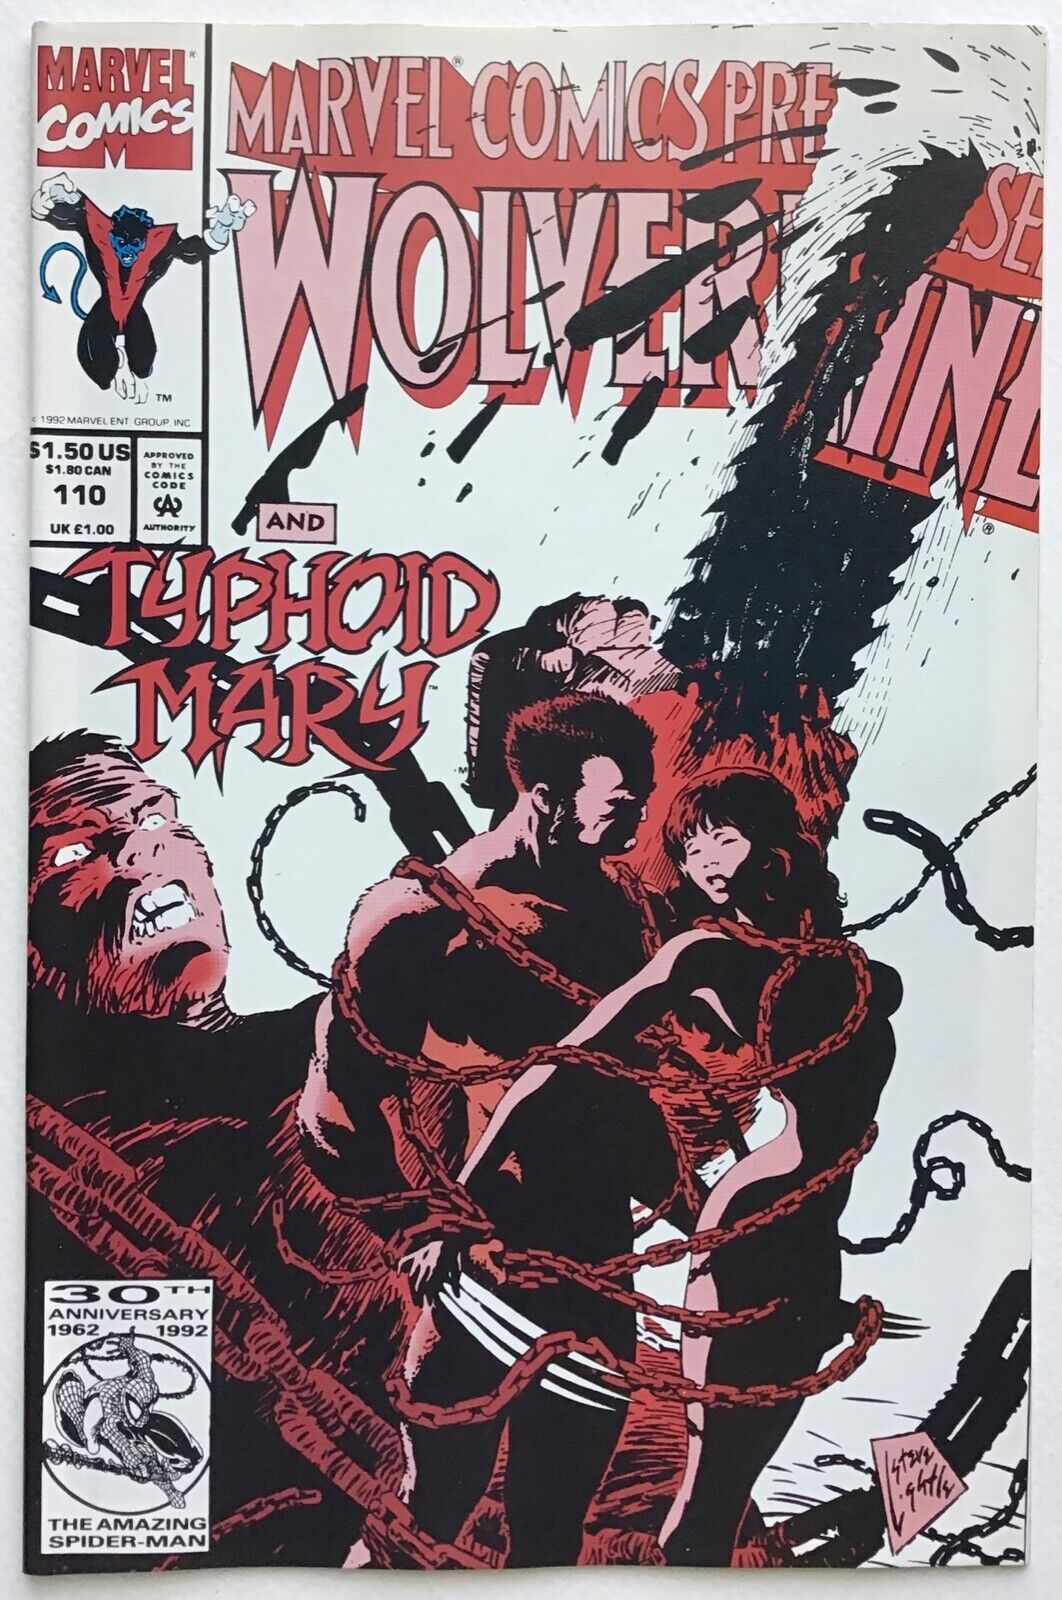 Marvel Comics Presents Wolverine 110 VF/NM Typhoid Mary  Will Combine Shipping